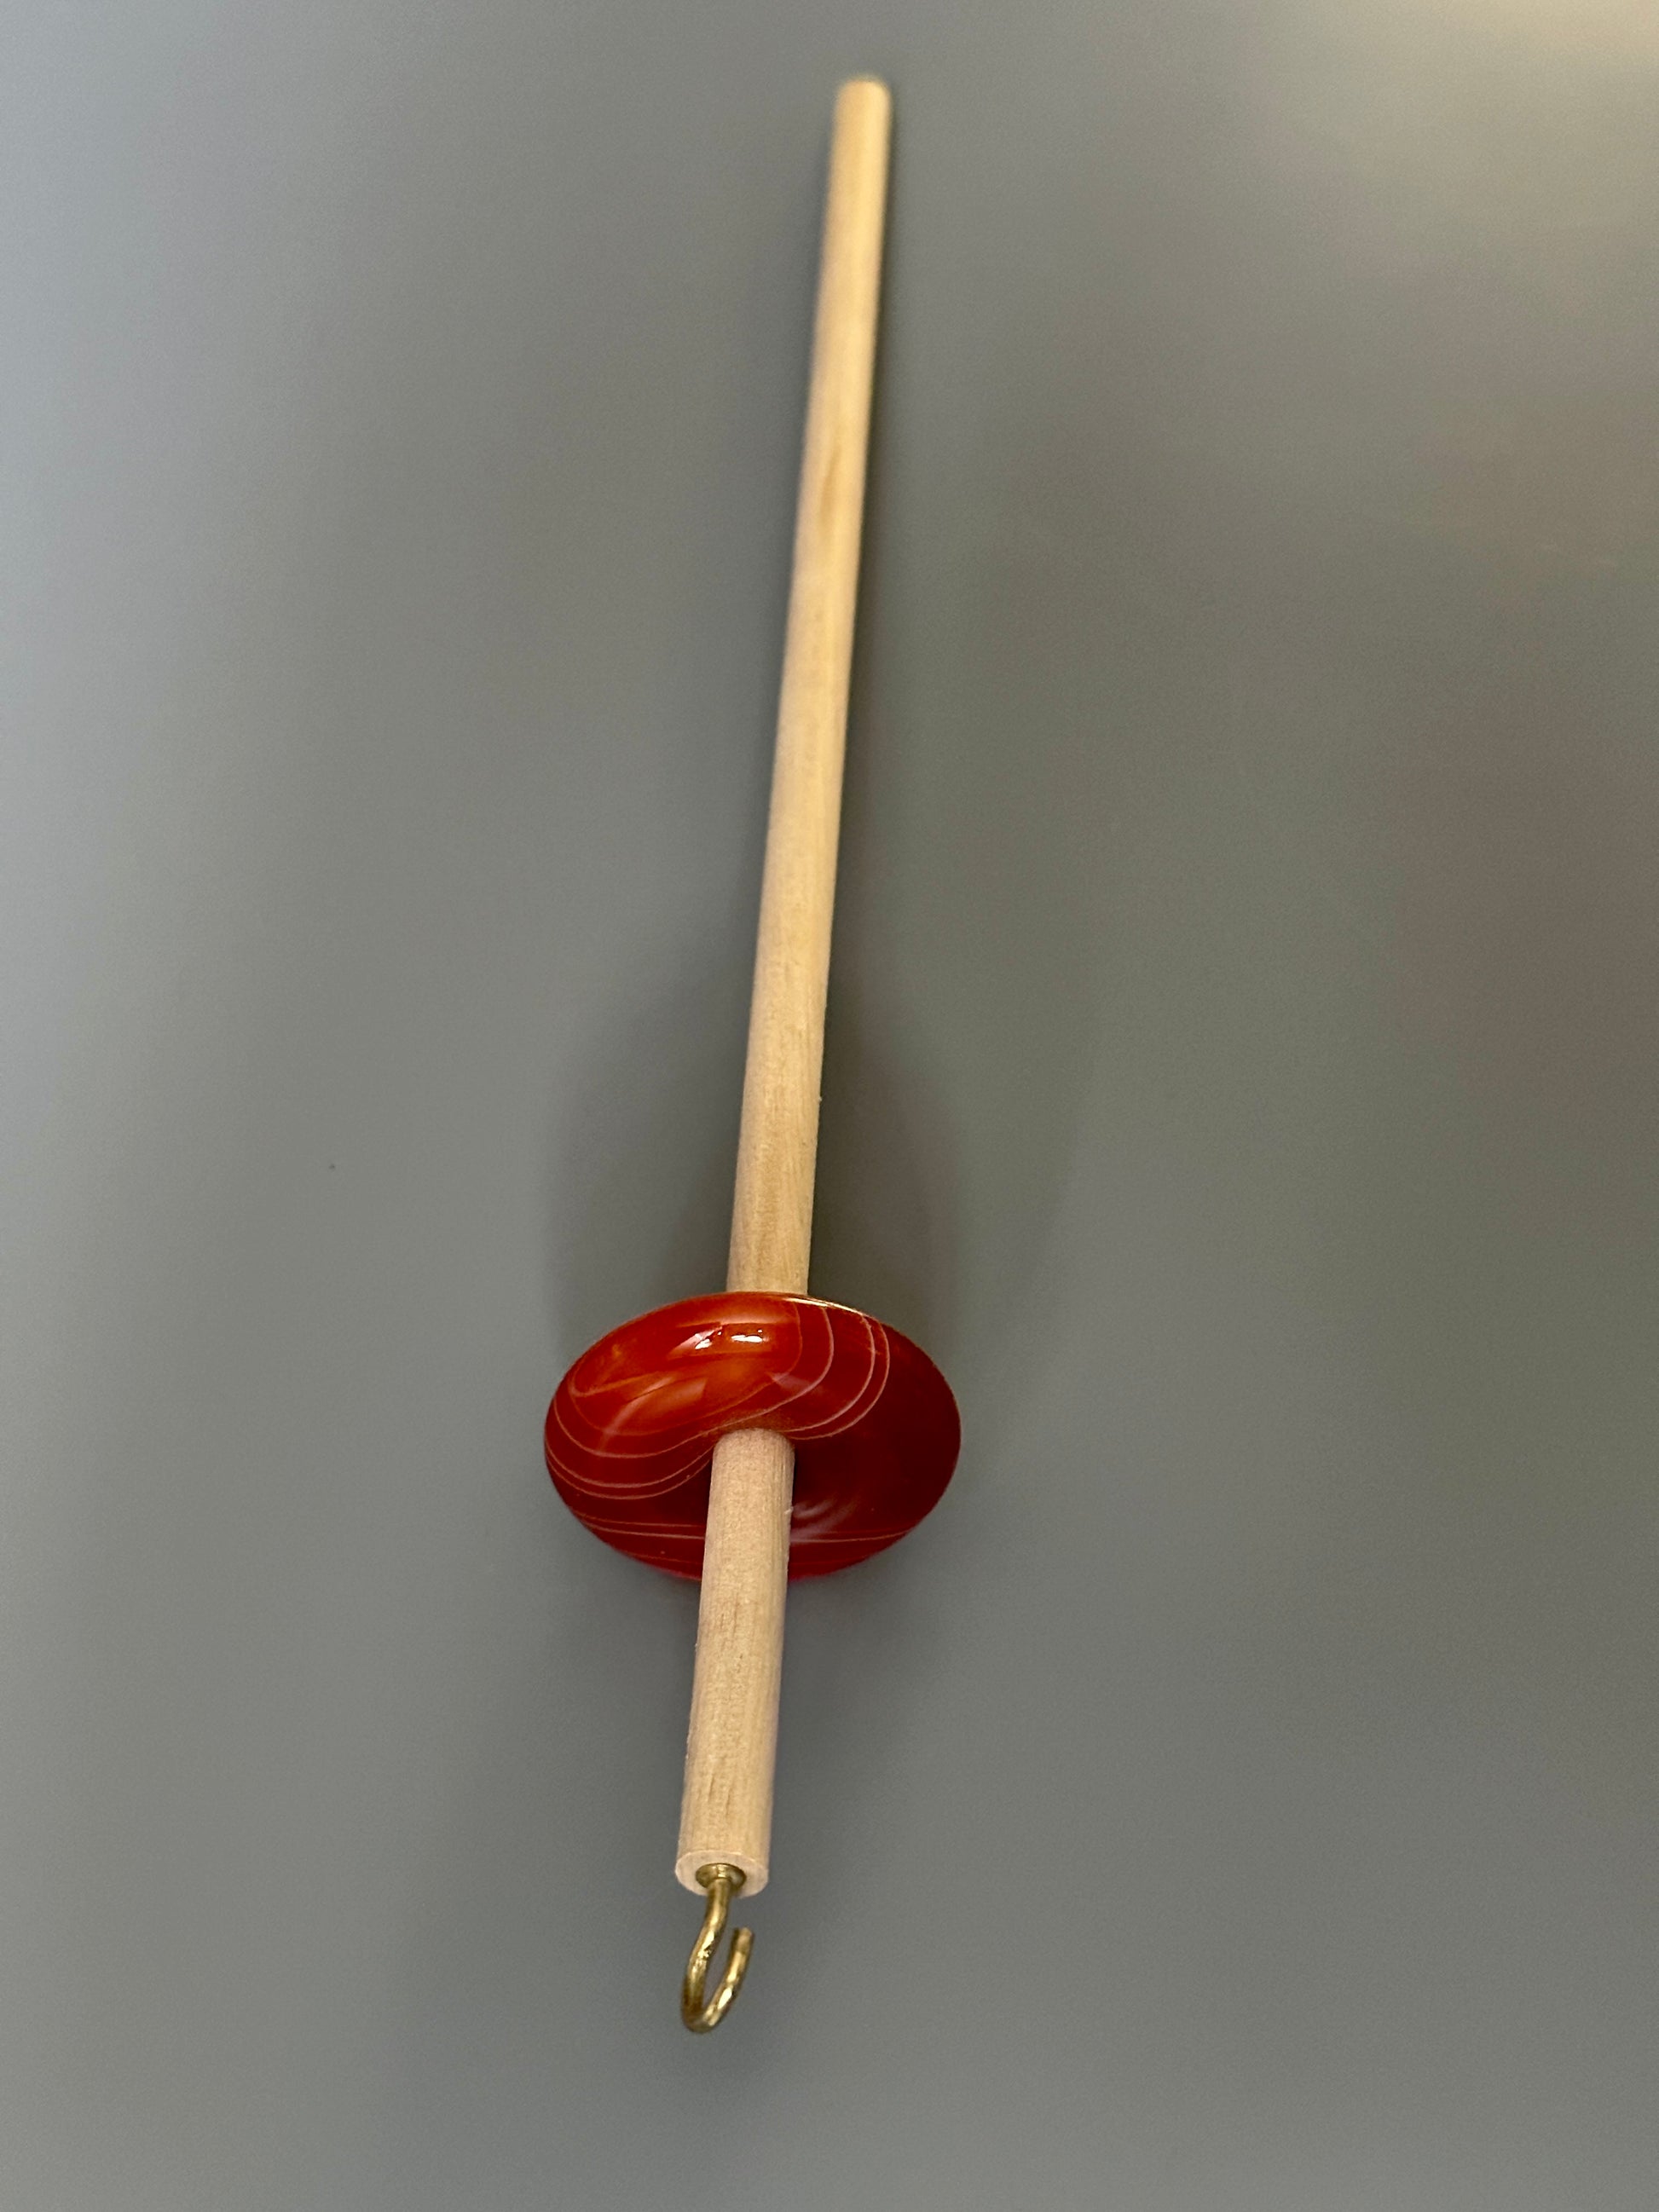 Wooden Drop Spindle